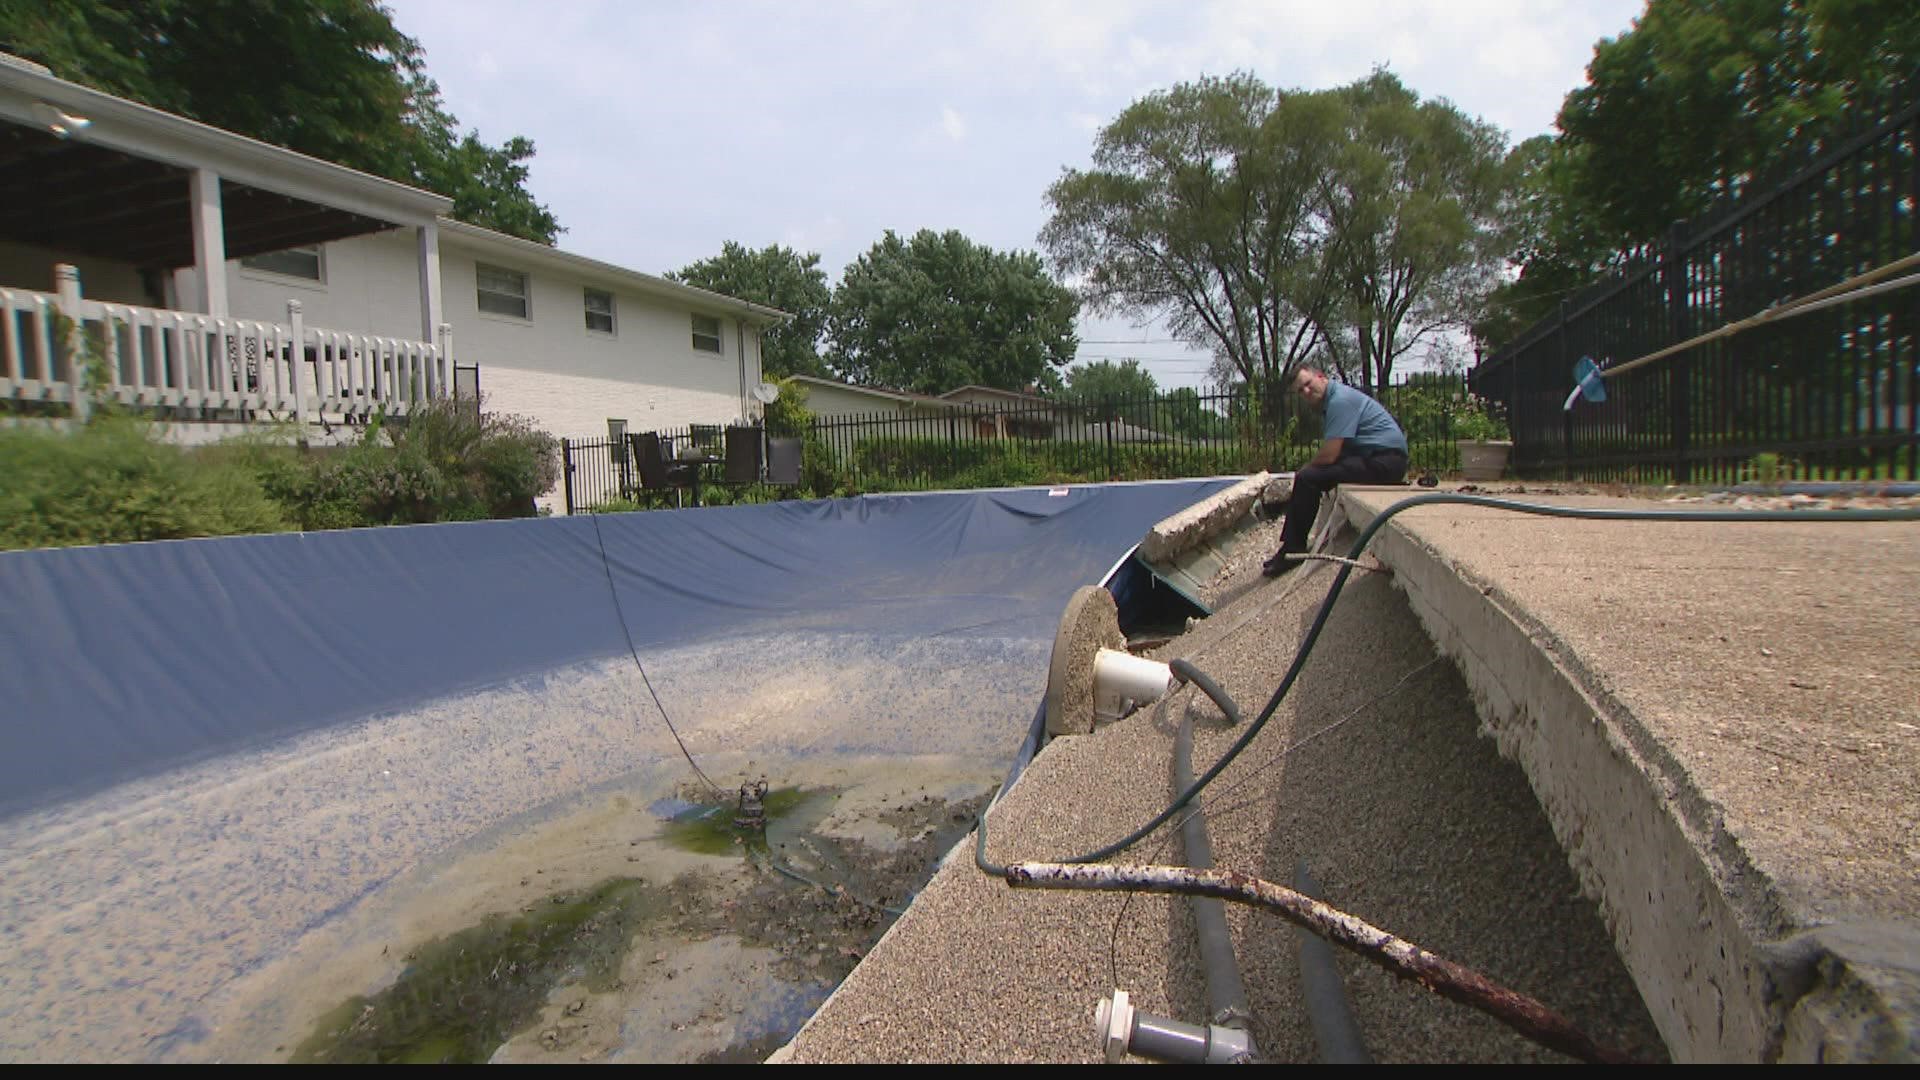 Kitty Smith spent one summer in her new dream backyard before tragedy struck, turning her swimming pool into a pile of rubble.